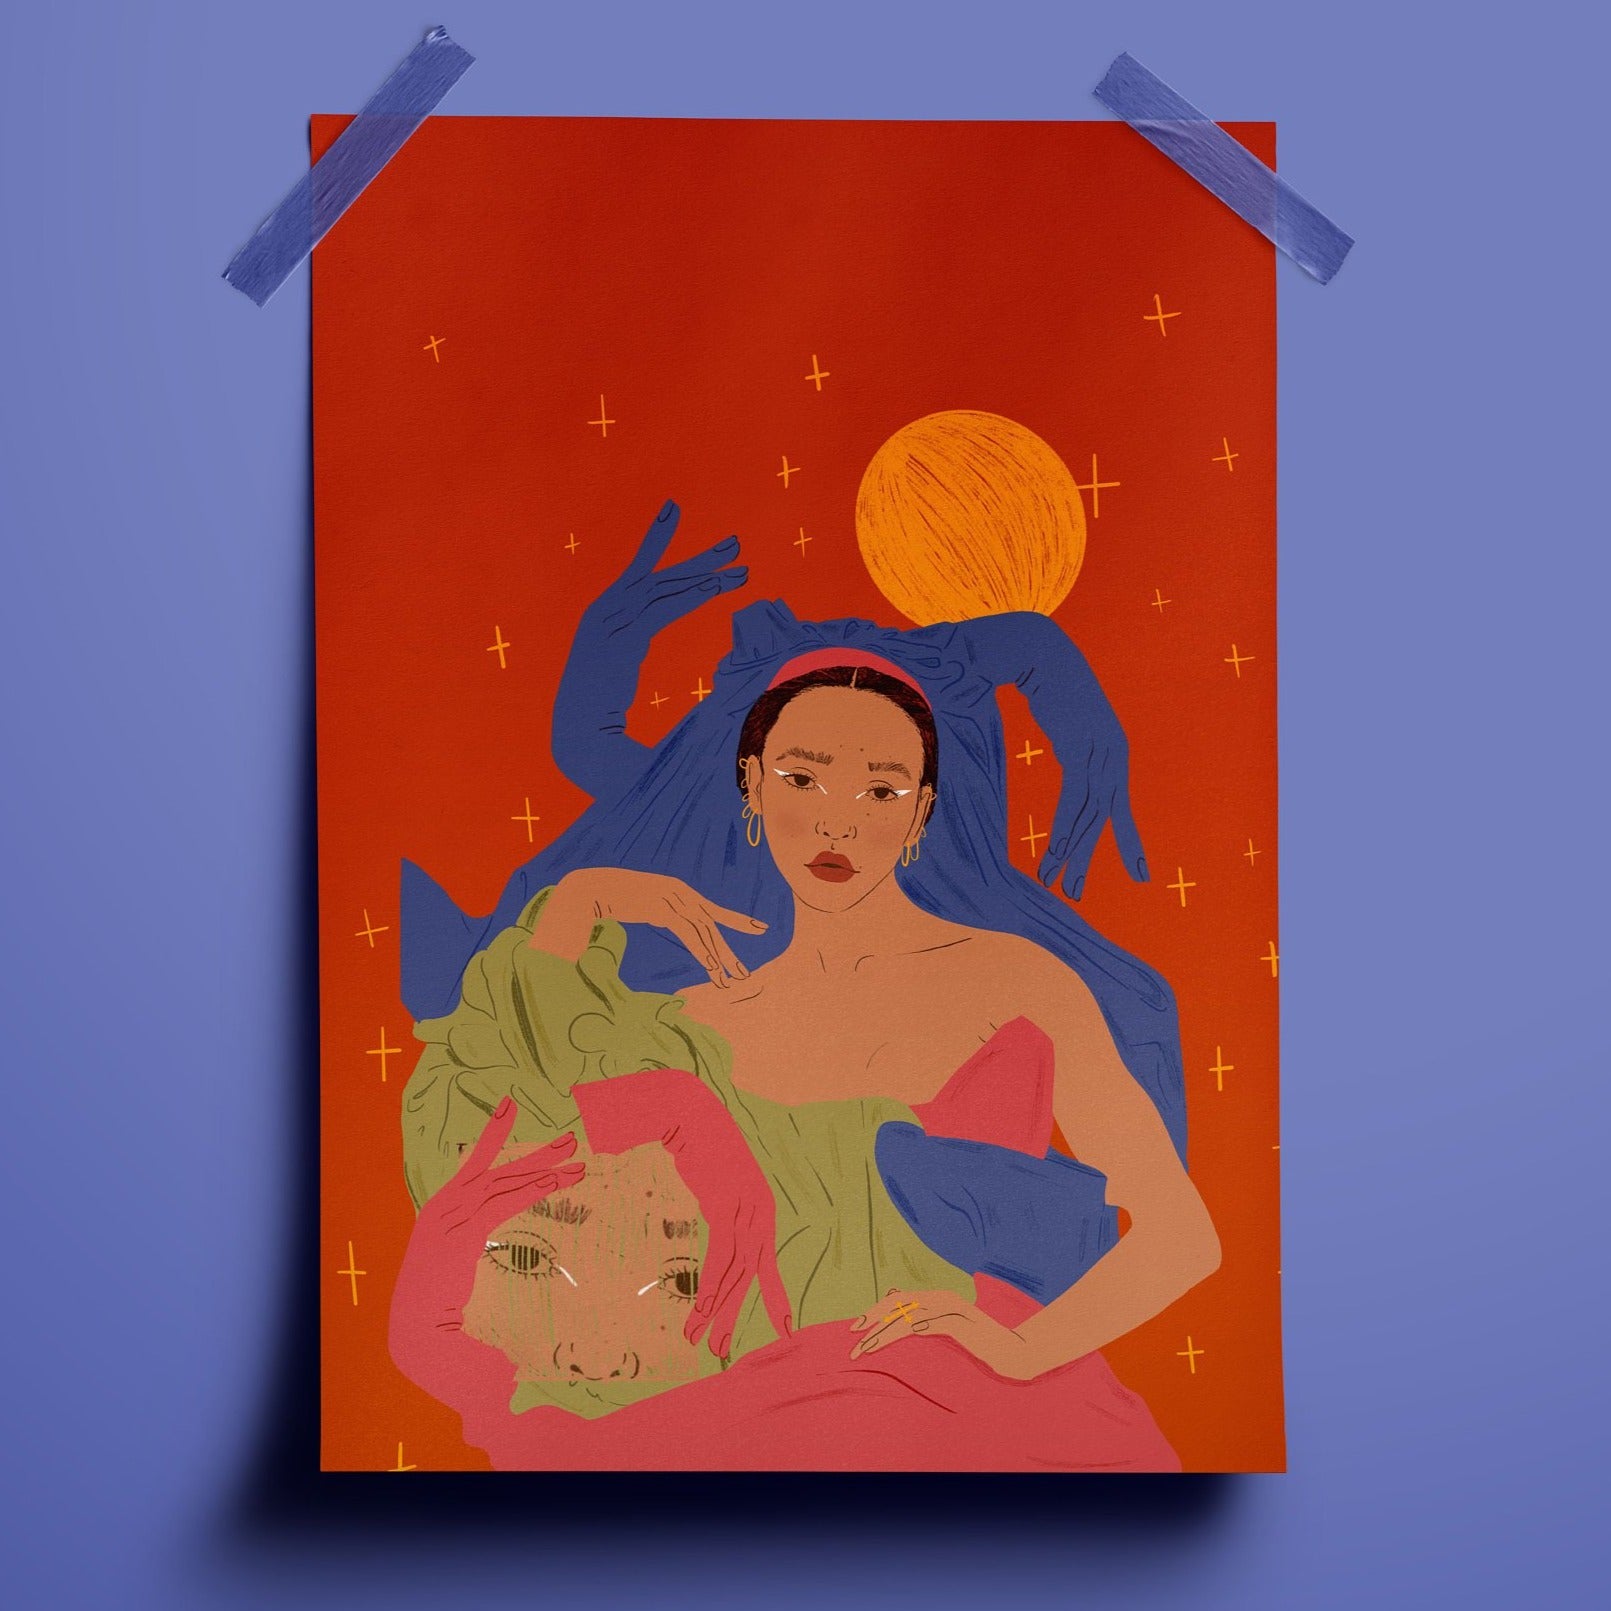 an illustration of FKA Twigs in a regal pose surrounded by crosses in yellow and a large sun behind her. she is adorned with a head dress with two surreal looking hands protruding from it. the colour scheme is predominantly blue and orange.